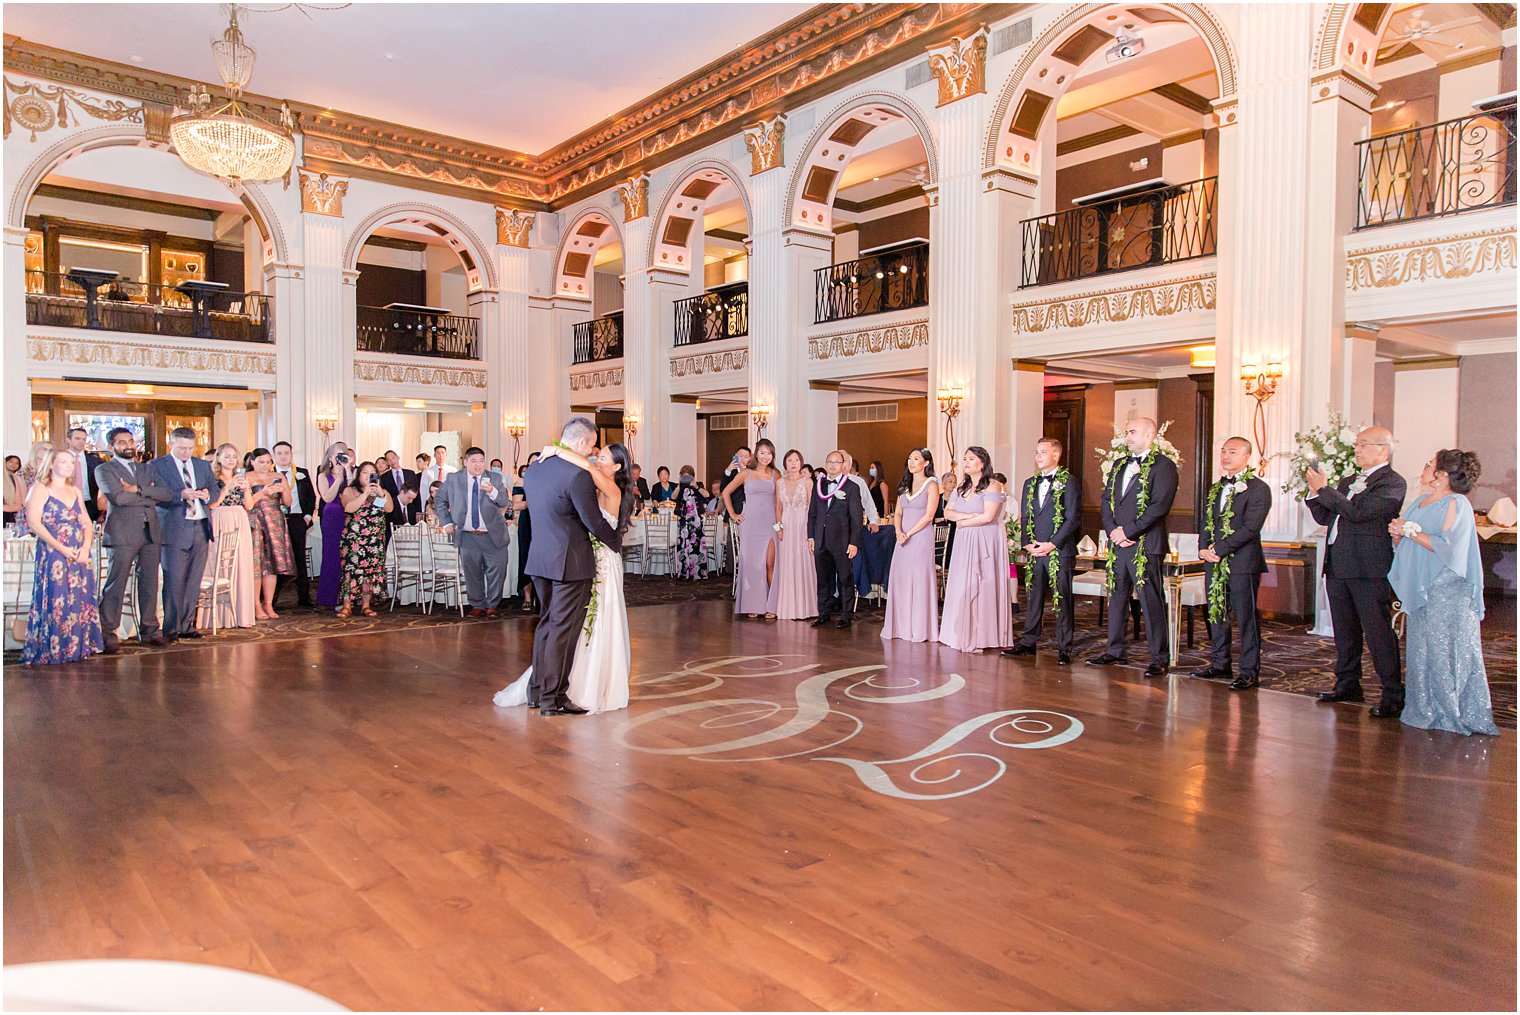 newlyweds have first dance on ballroom dance floor with monogram in lights